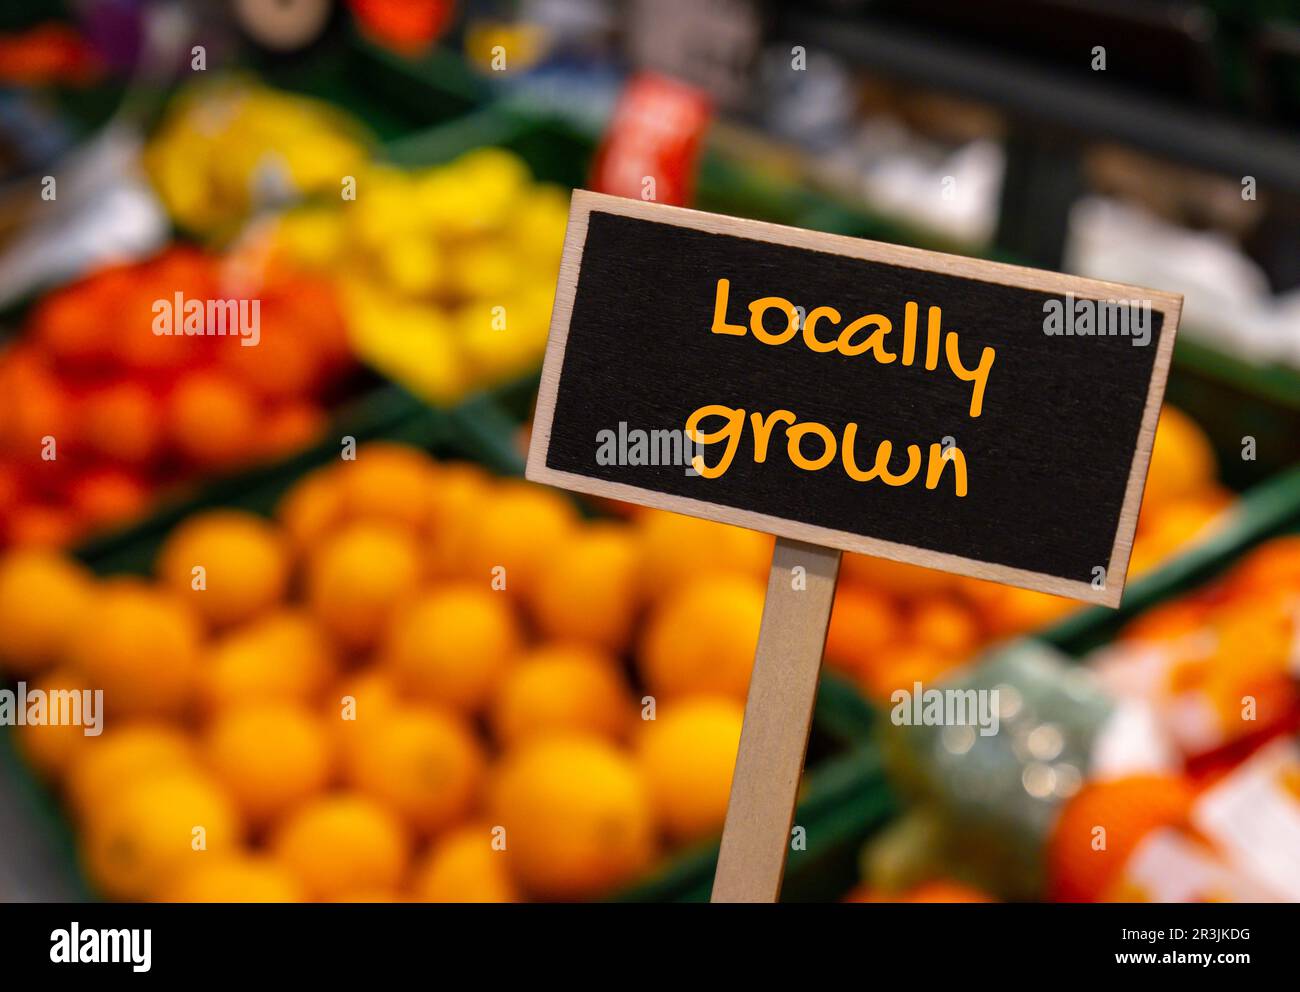 Wooden information label sign with text LOCALLY GROWN against defocused store shelves message. supporting local farmers Harvest Stock Photo